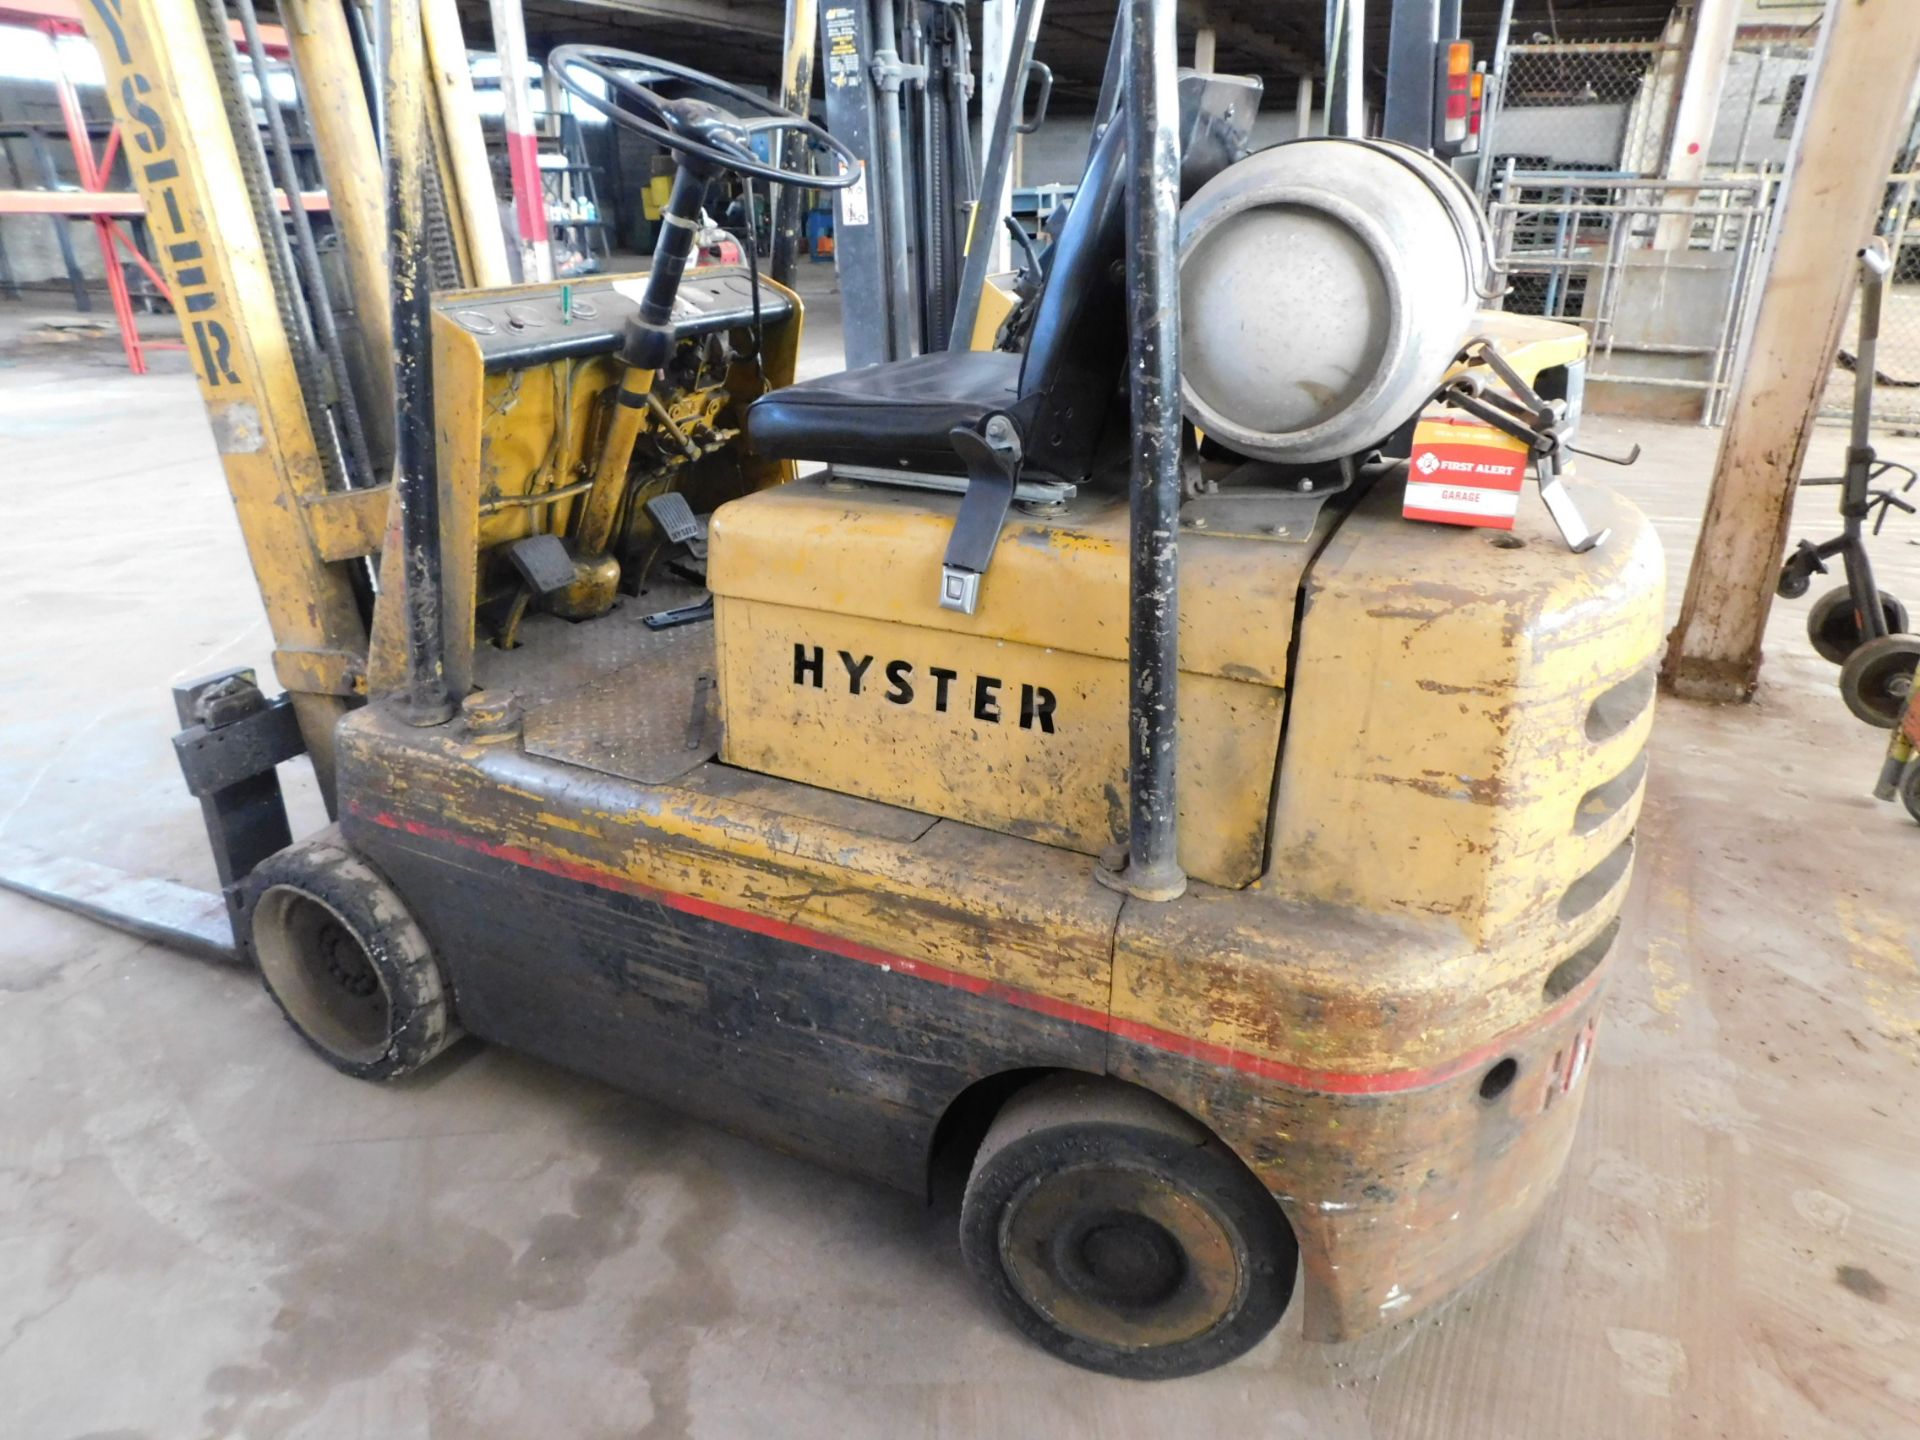 Hyster Model 50 Fork Lift, s/n Unknown, 5,000 Lb. Capacity, 3-Stage Mast, 42" Forks, Hard Tire, - Image 5 of 9